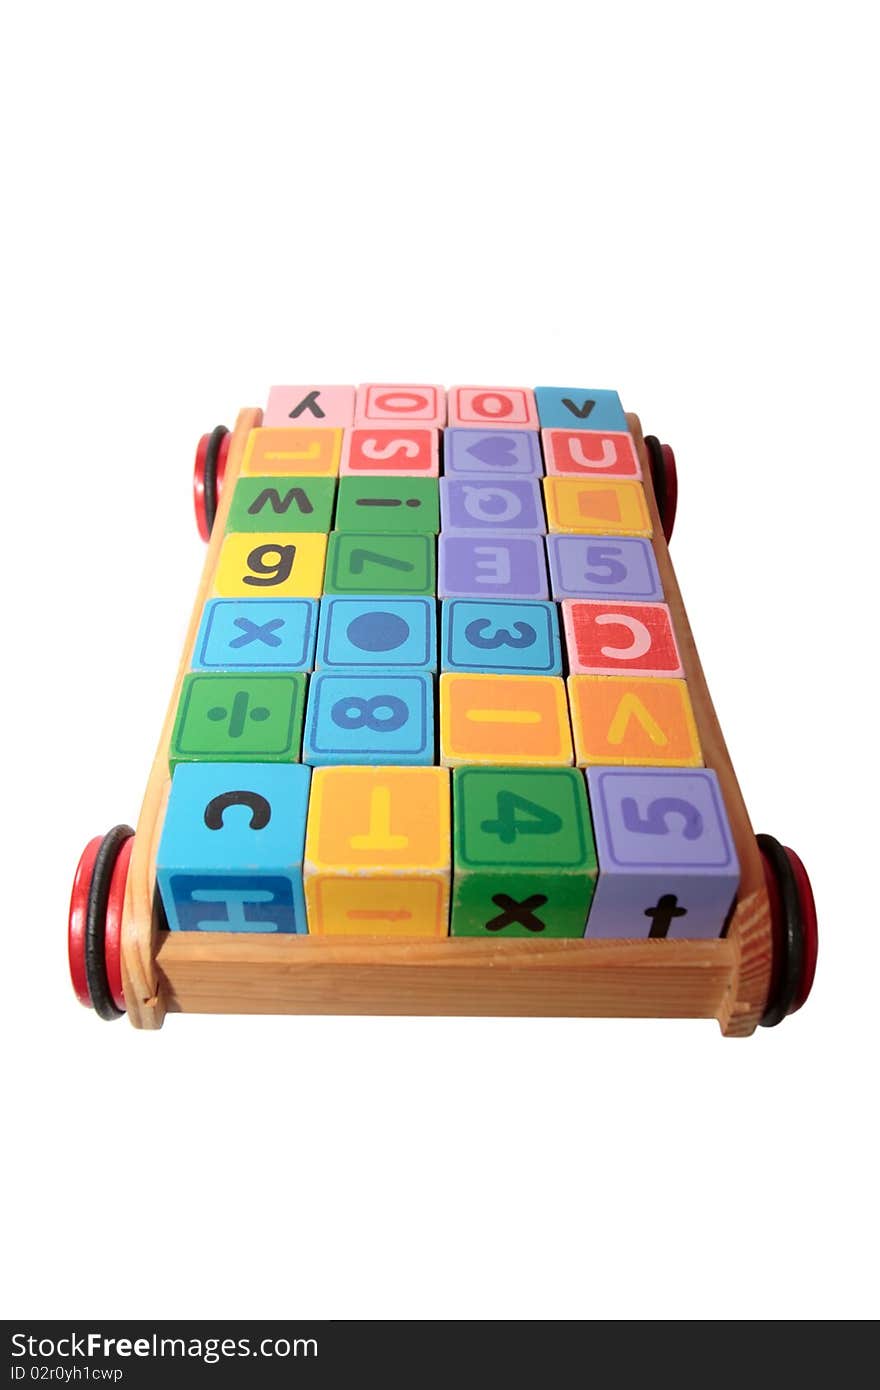 Childrens toy letter building blocks all together in a toy cart isolated on white background with clipping path. Childrens toy letter building blocks all together in a toy cart isolated on white background with clipping path